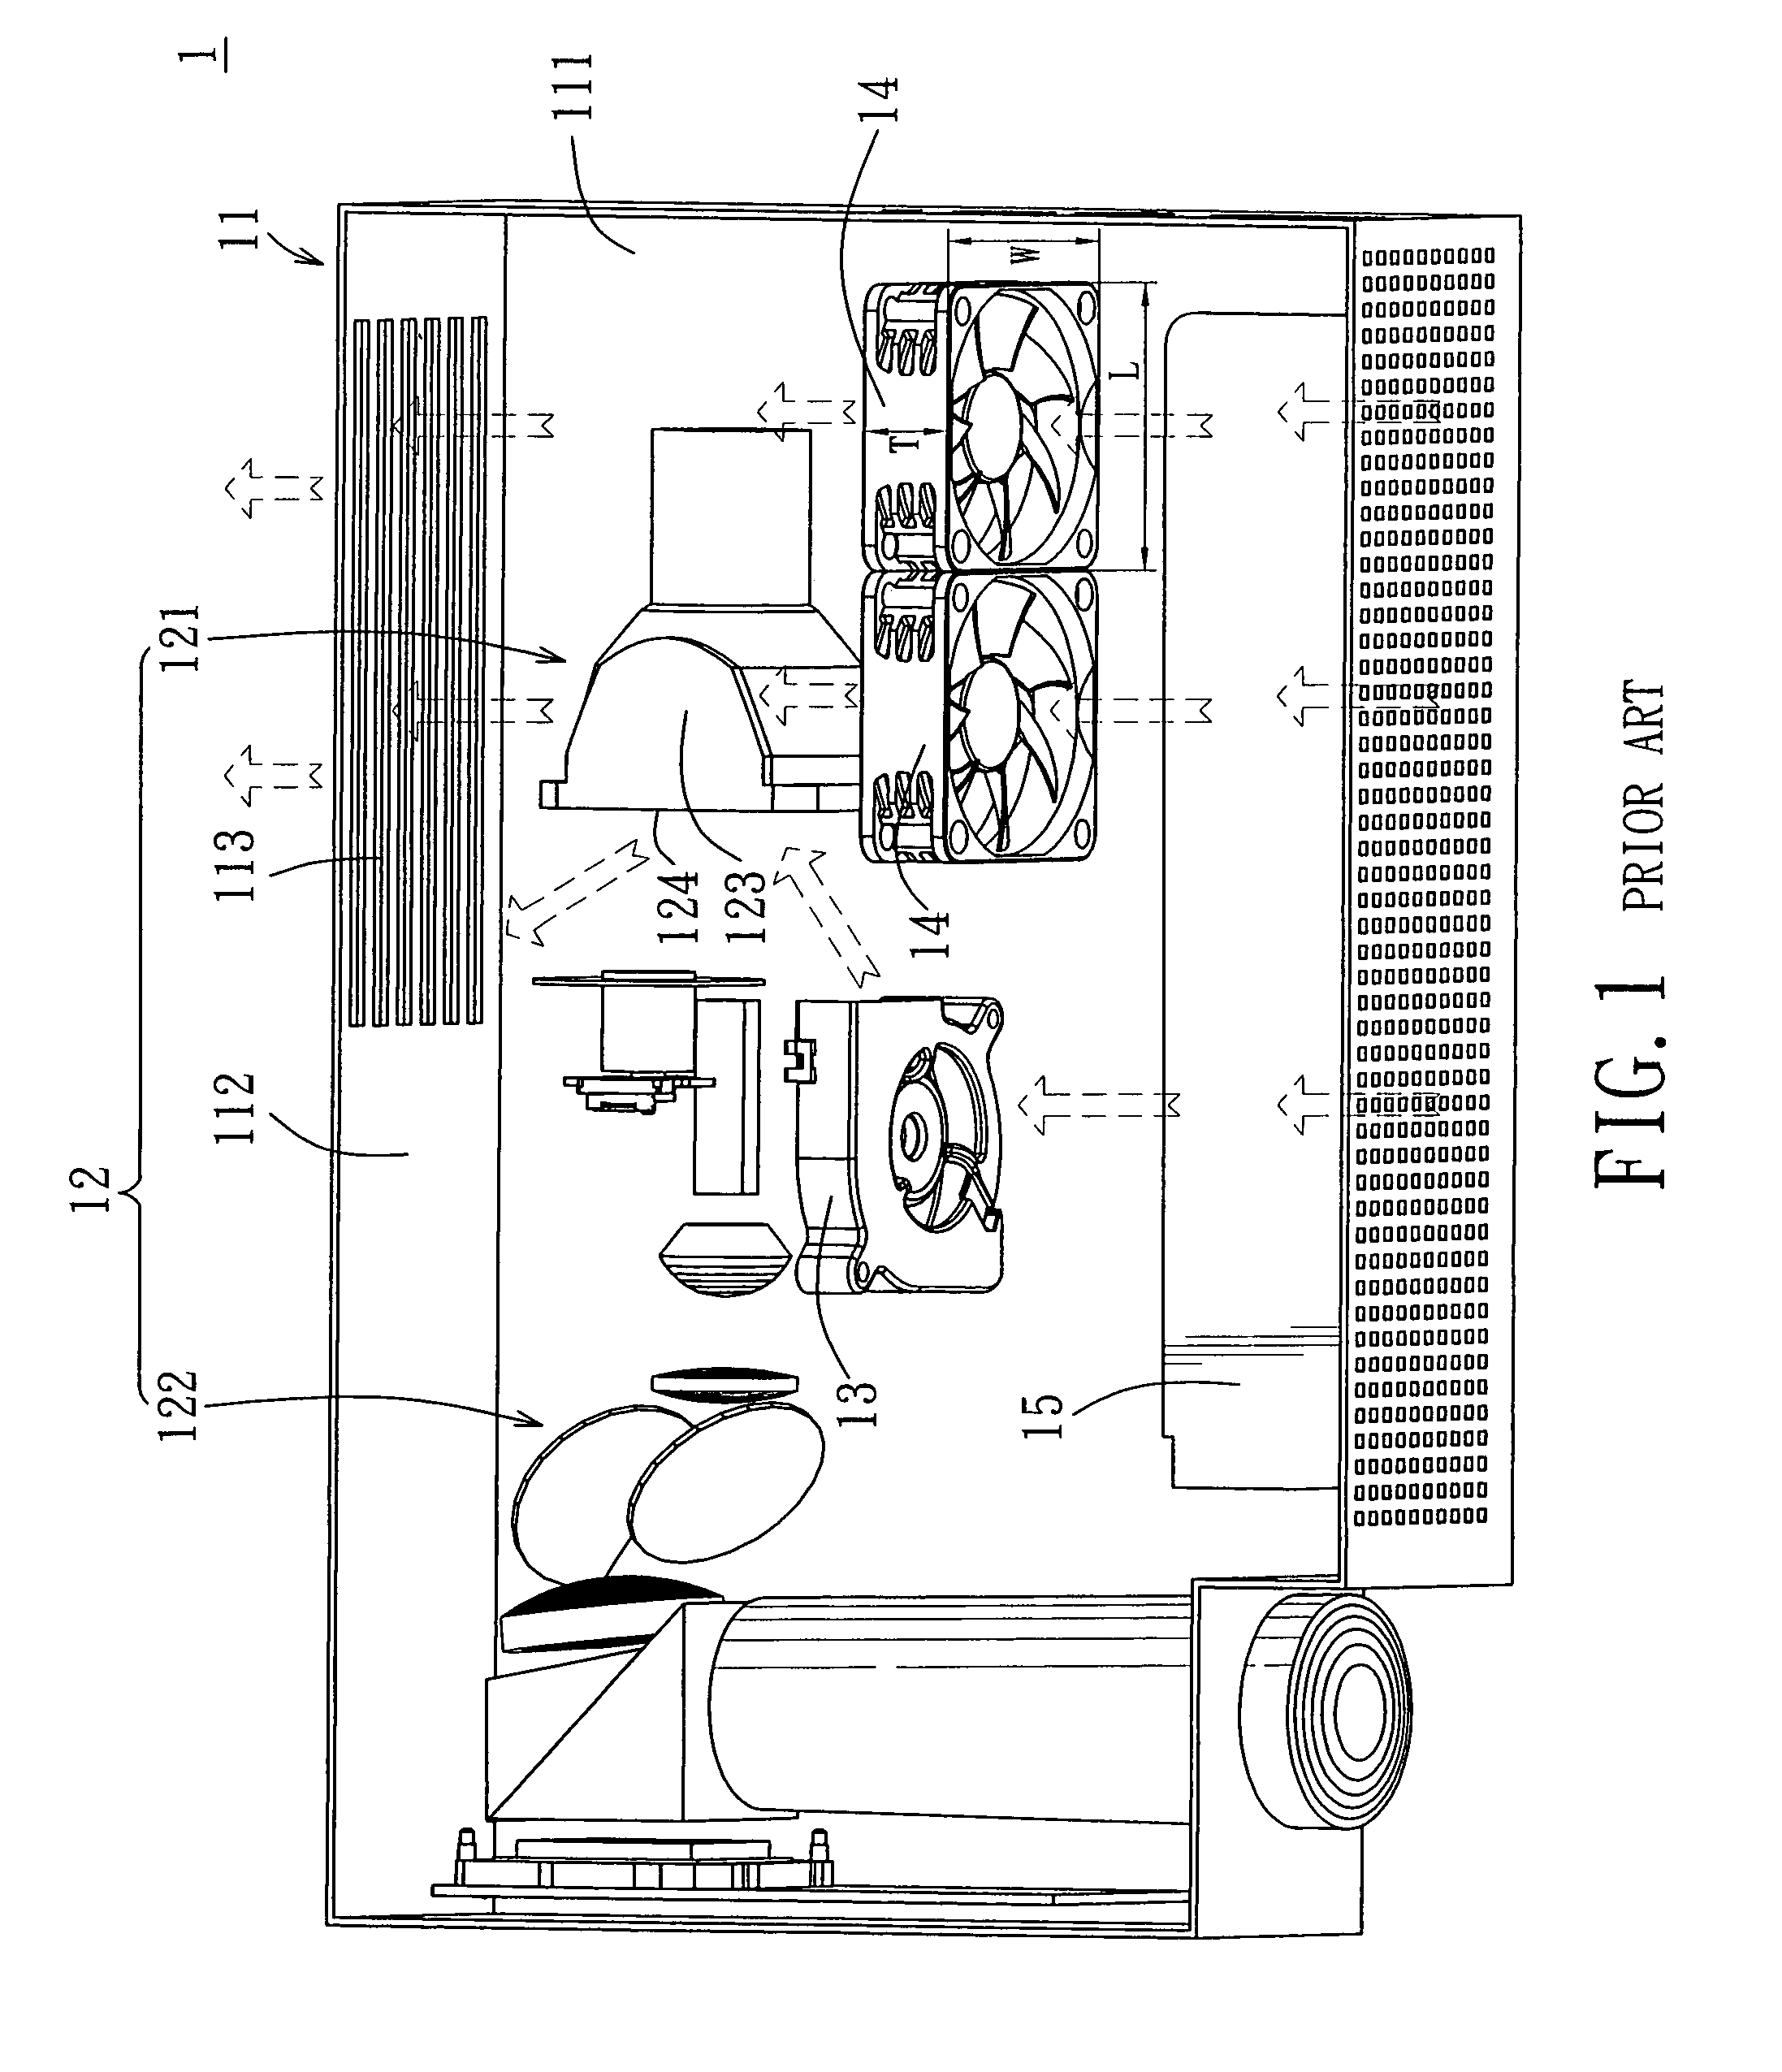 Projecting device having a heat-dissipating mechanism